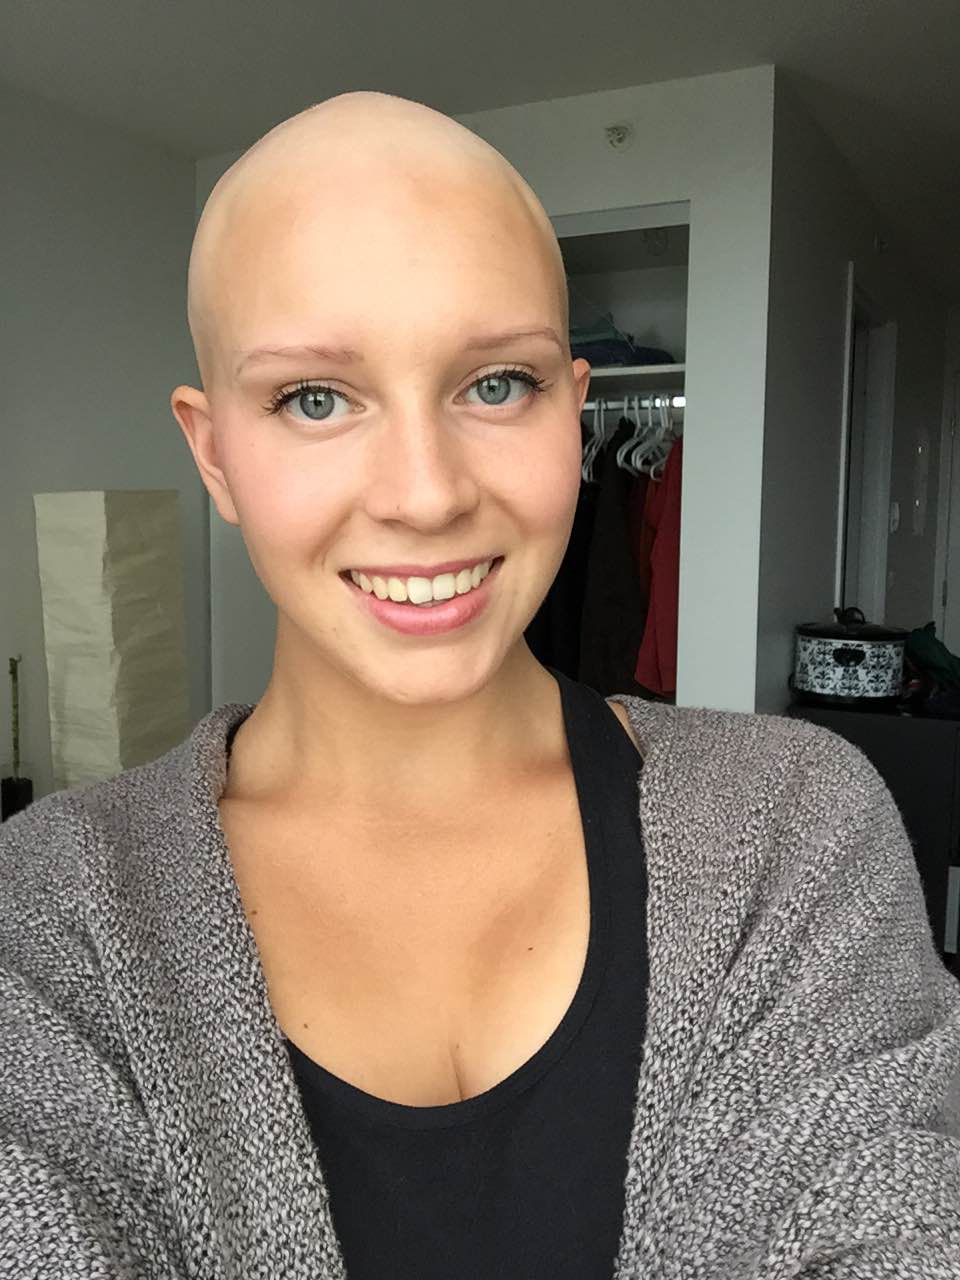 My wife finally shaved